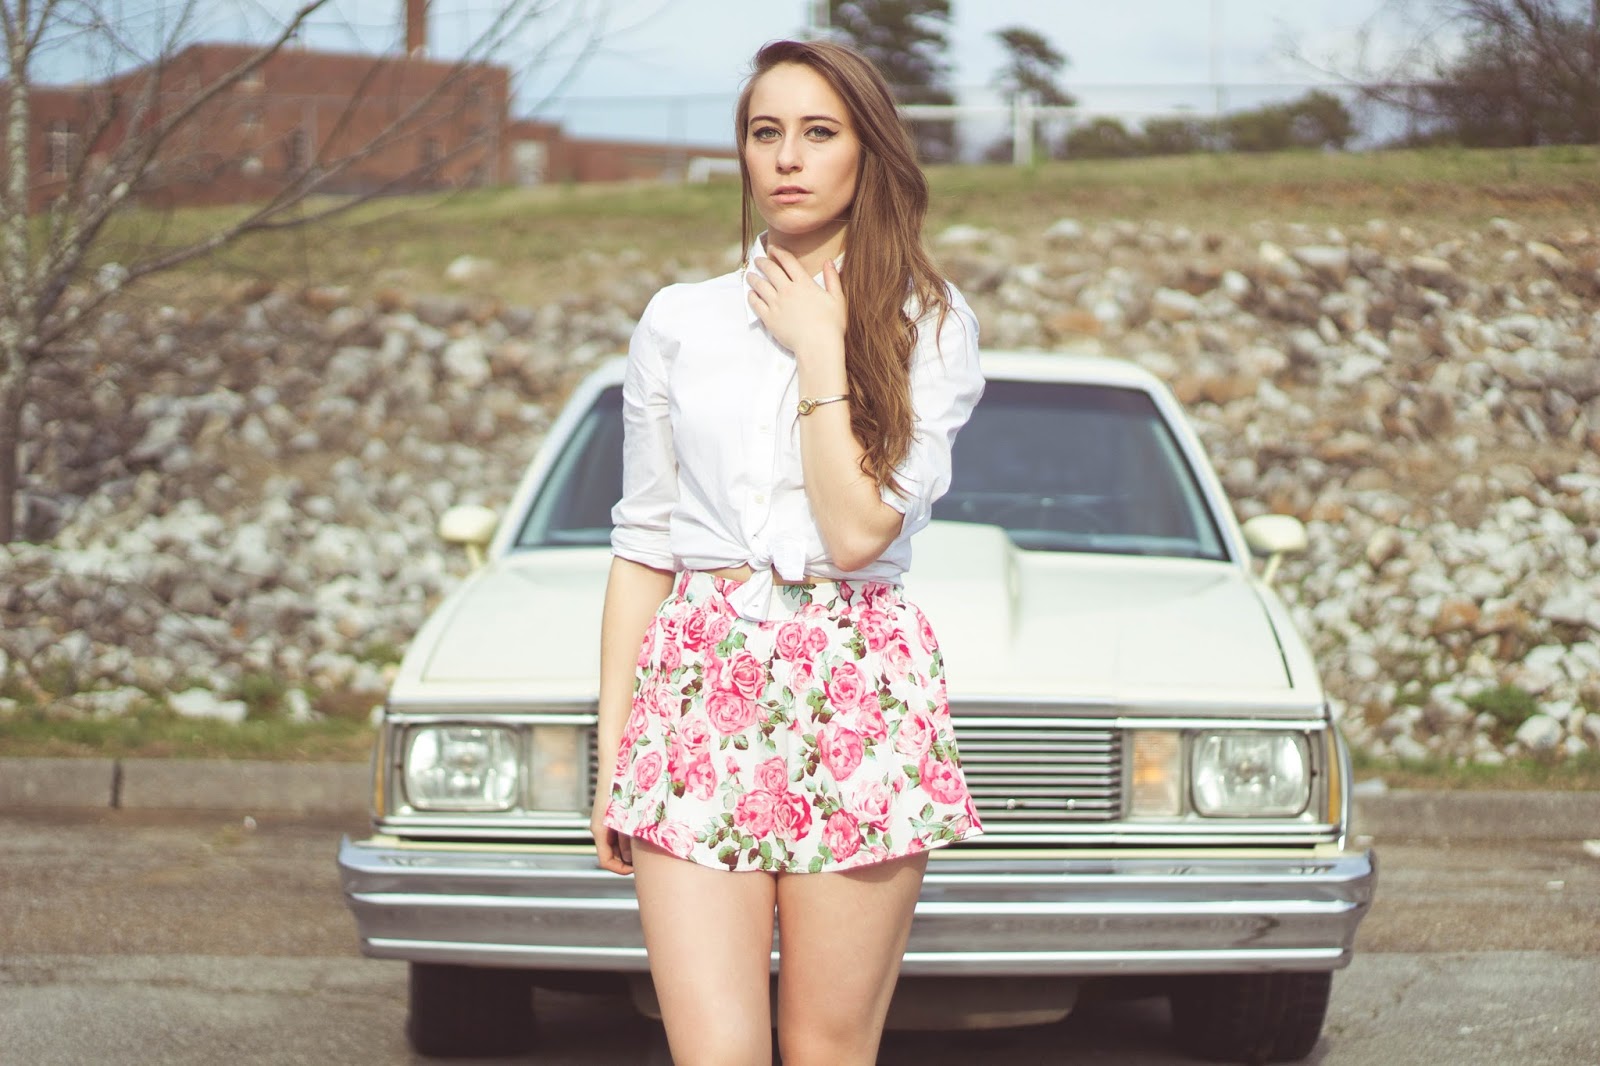 Vintage Inspired Outfit, lana del rey style, retro style, outfit, fashion blogger, feminine, femme fatale,forever 21 floral skort, gap white button up, el camino, film blogger, movies, style